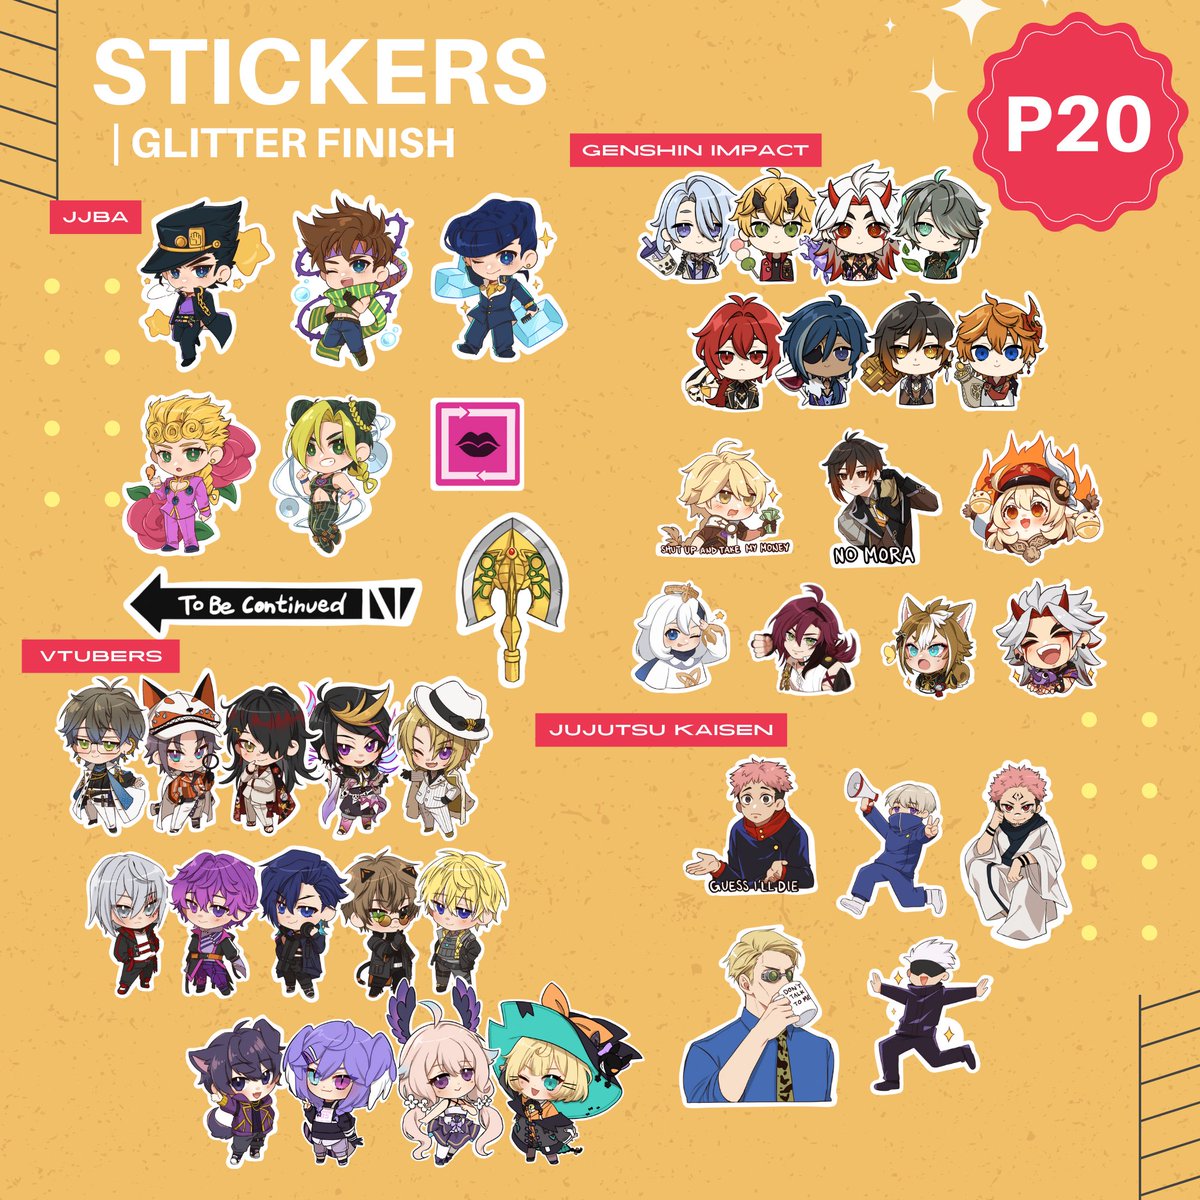 Heyaa!! I'll be tabling in CosMania 2022 this year w/ @sheishii and @ArtMomarie 🫶✨
Here is my official catalog so do visit our booth at the Artist Alley area we are booth F39!!

I'll be cosplaying both days as well so you'll know who I am on those days lmao 
#COSMANIA2022 